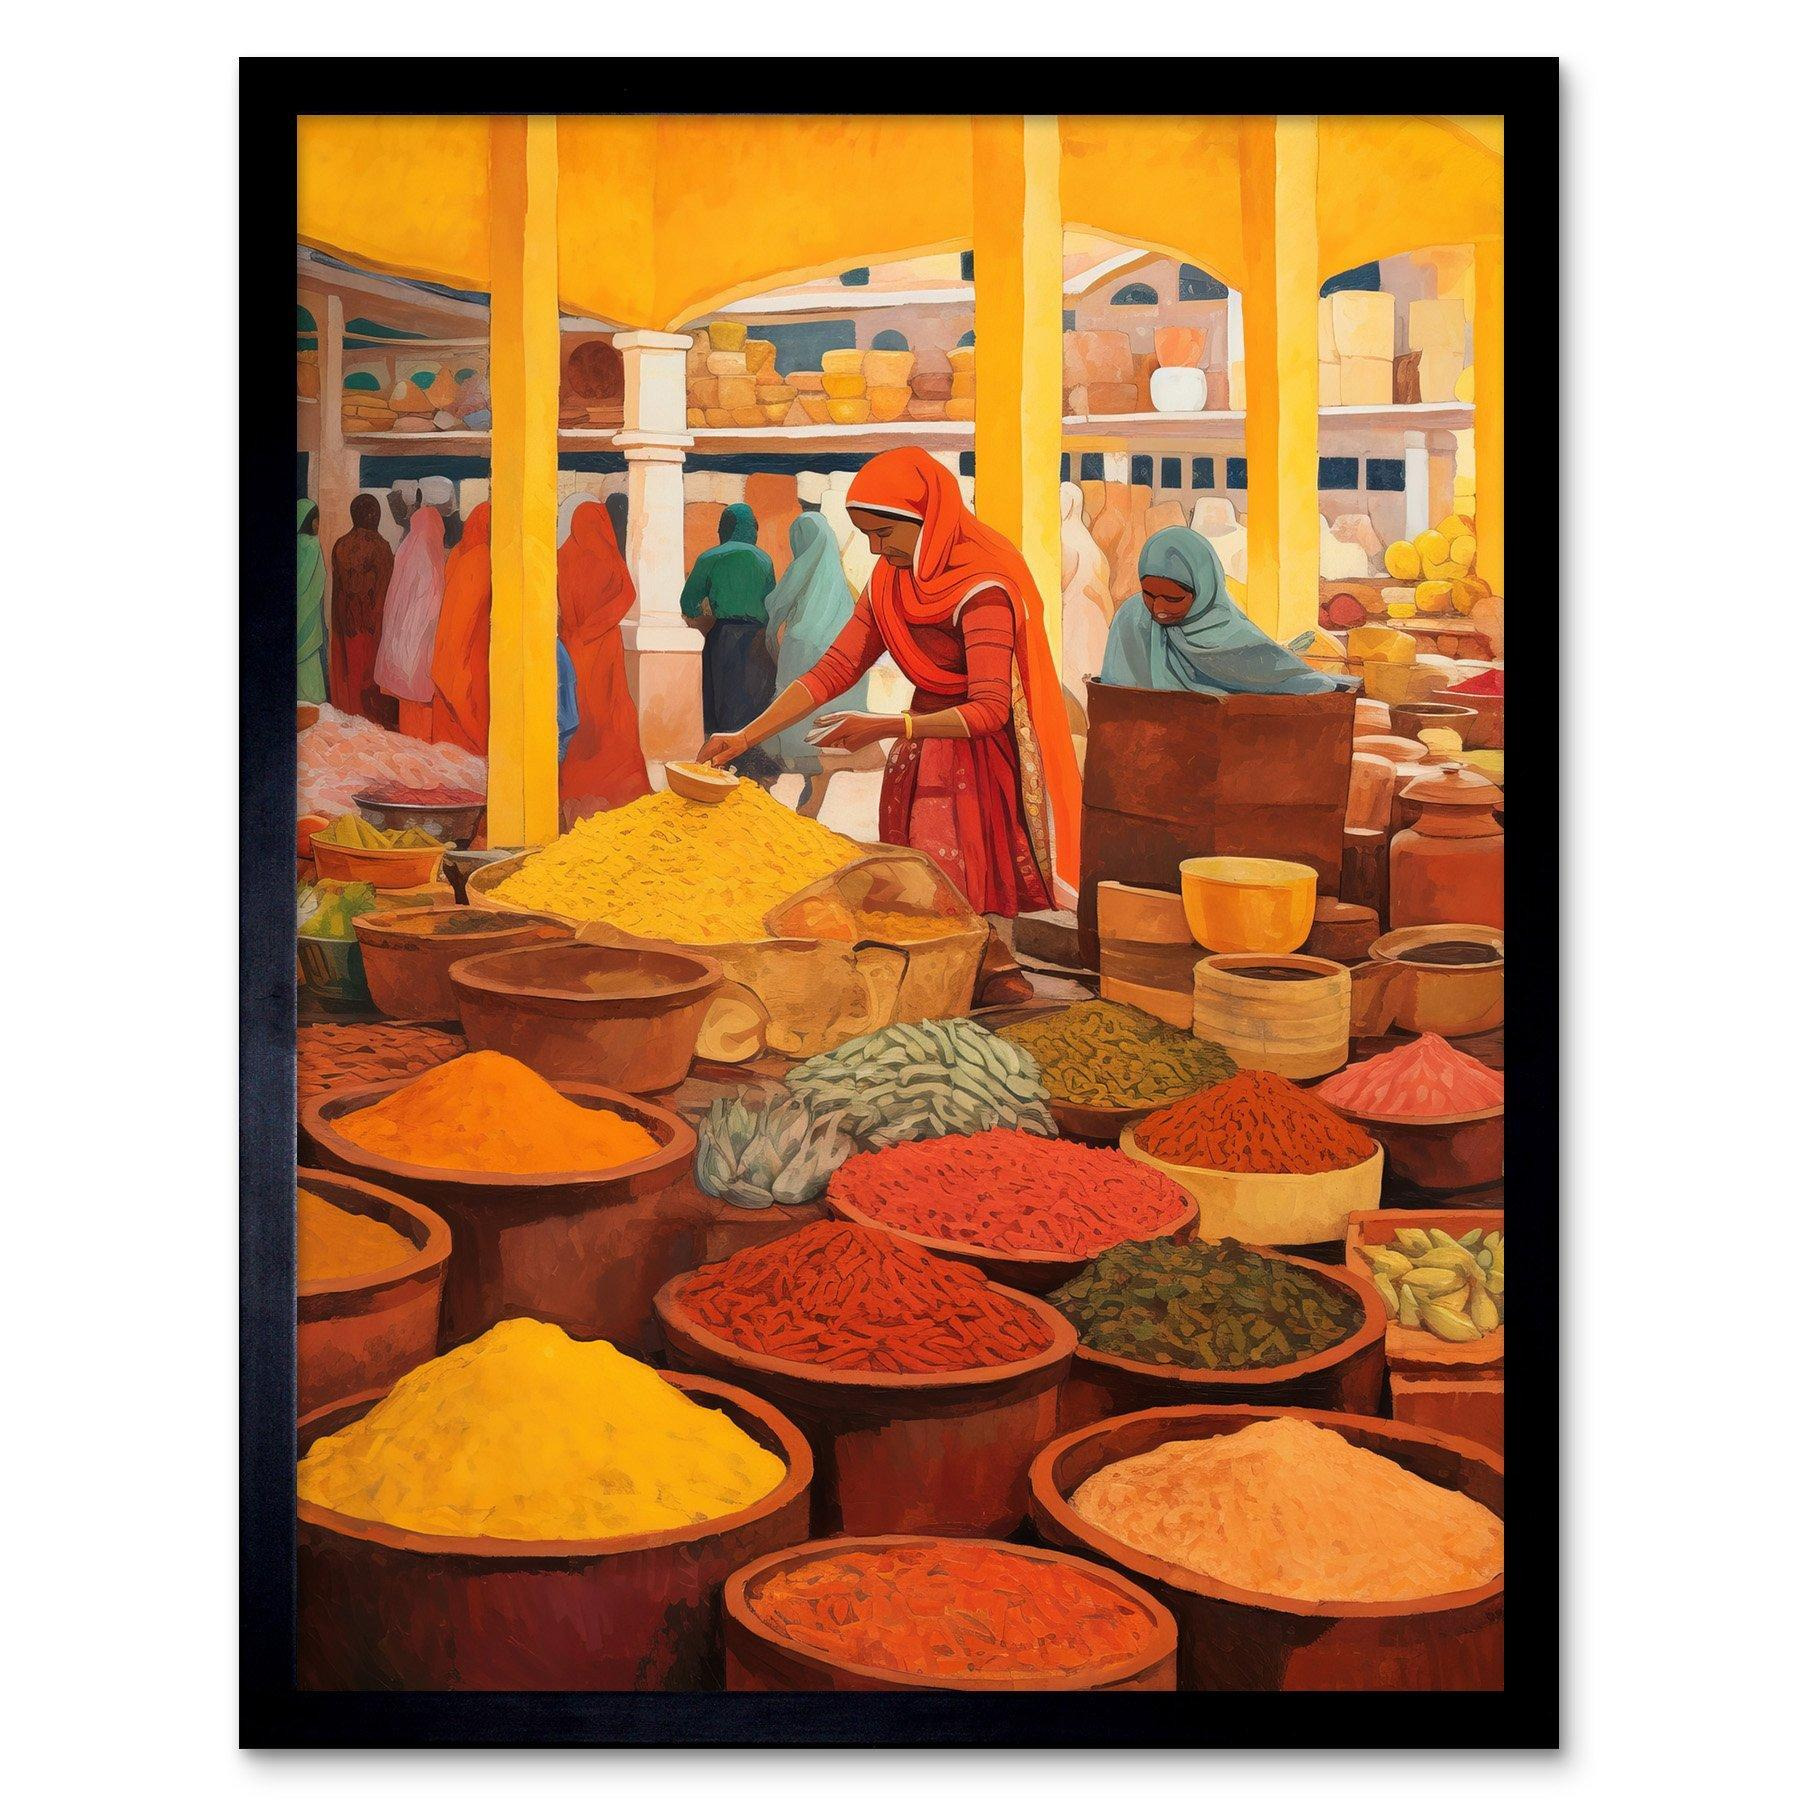 The Spice Market Asian Herbs and Spices Colourful Kitchen Artwork Art Print Framed Poster Wall Decor 12x16 inch - image 1